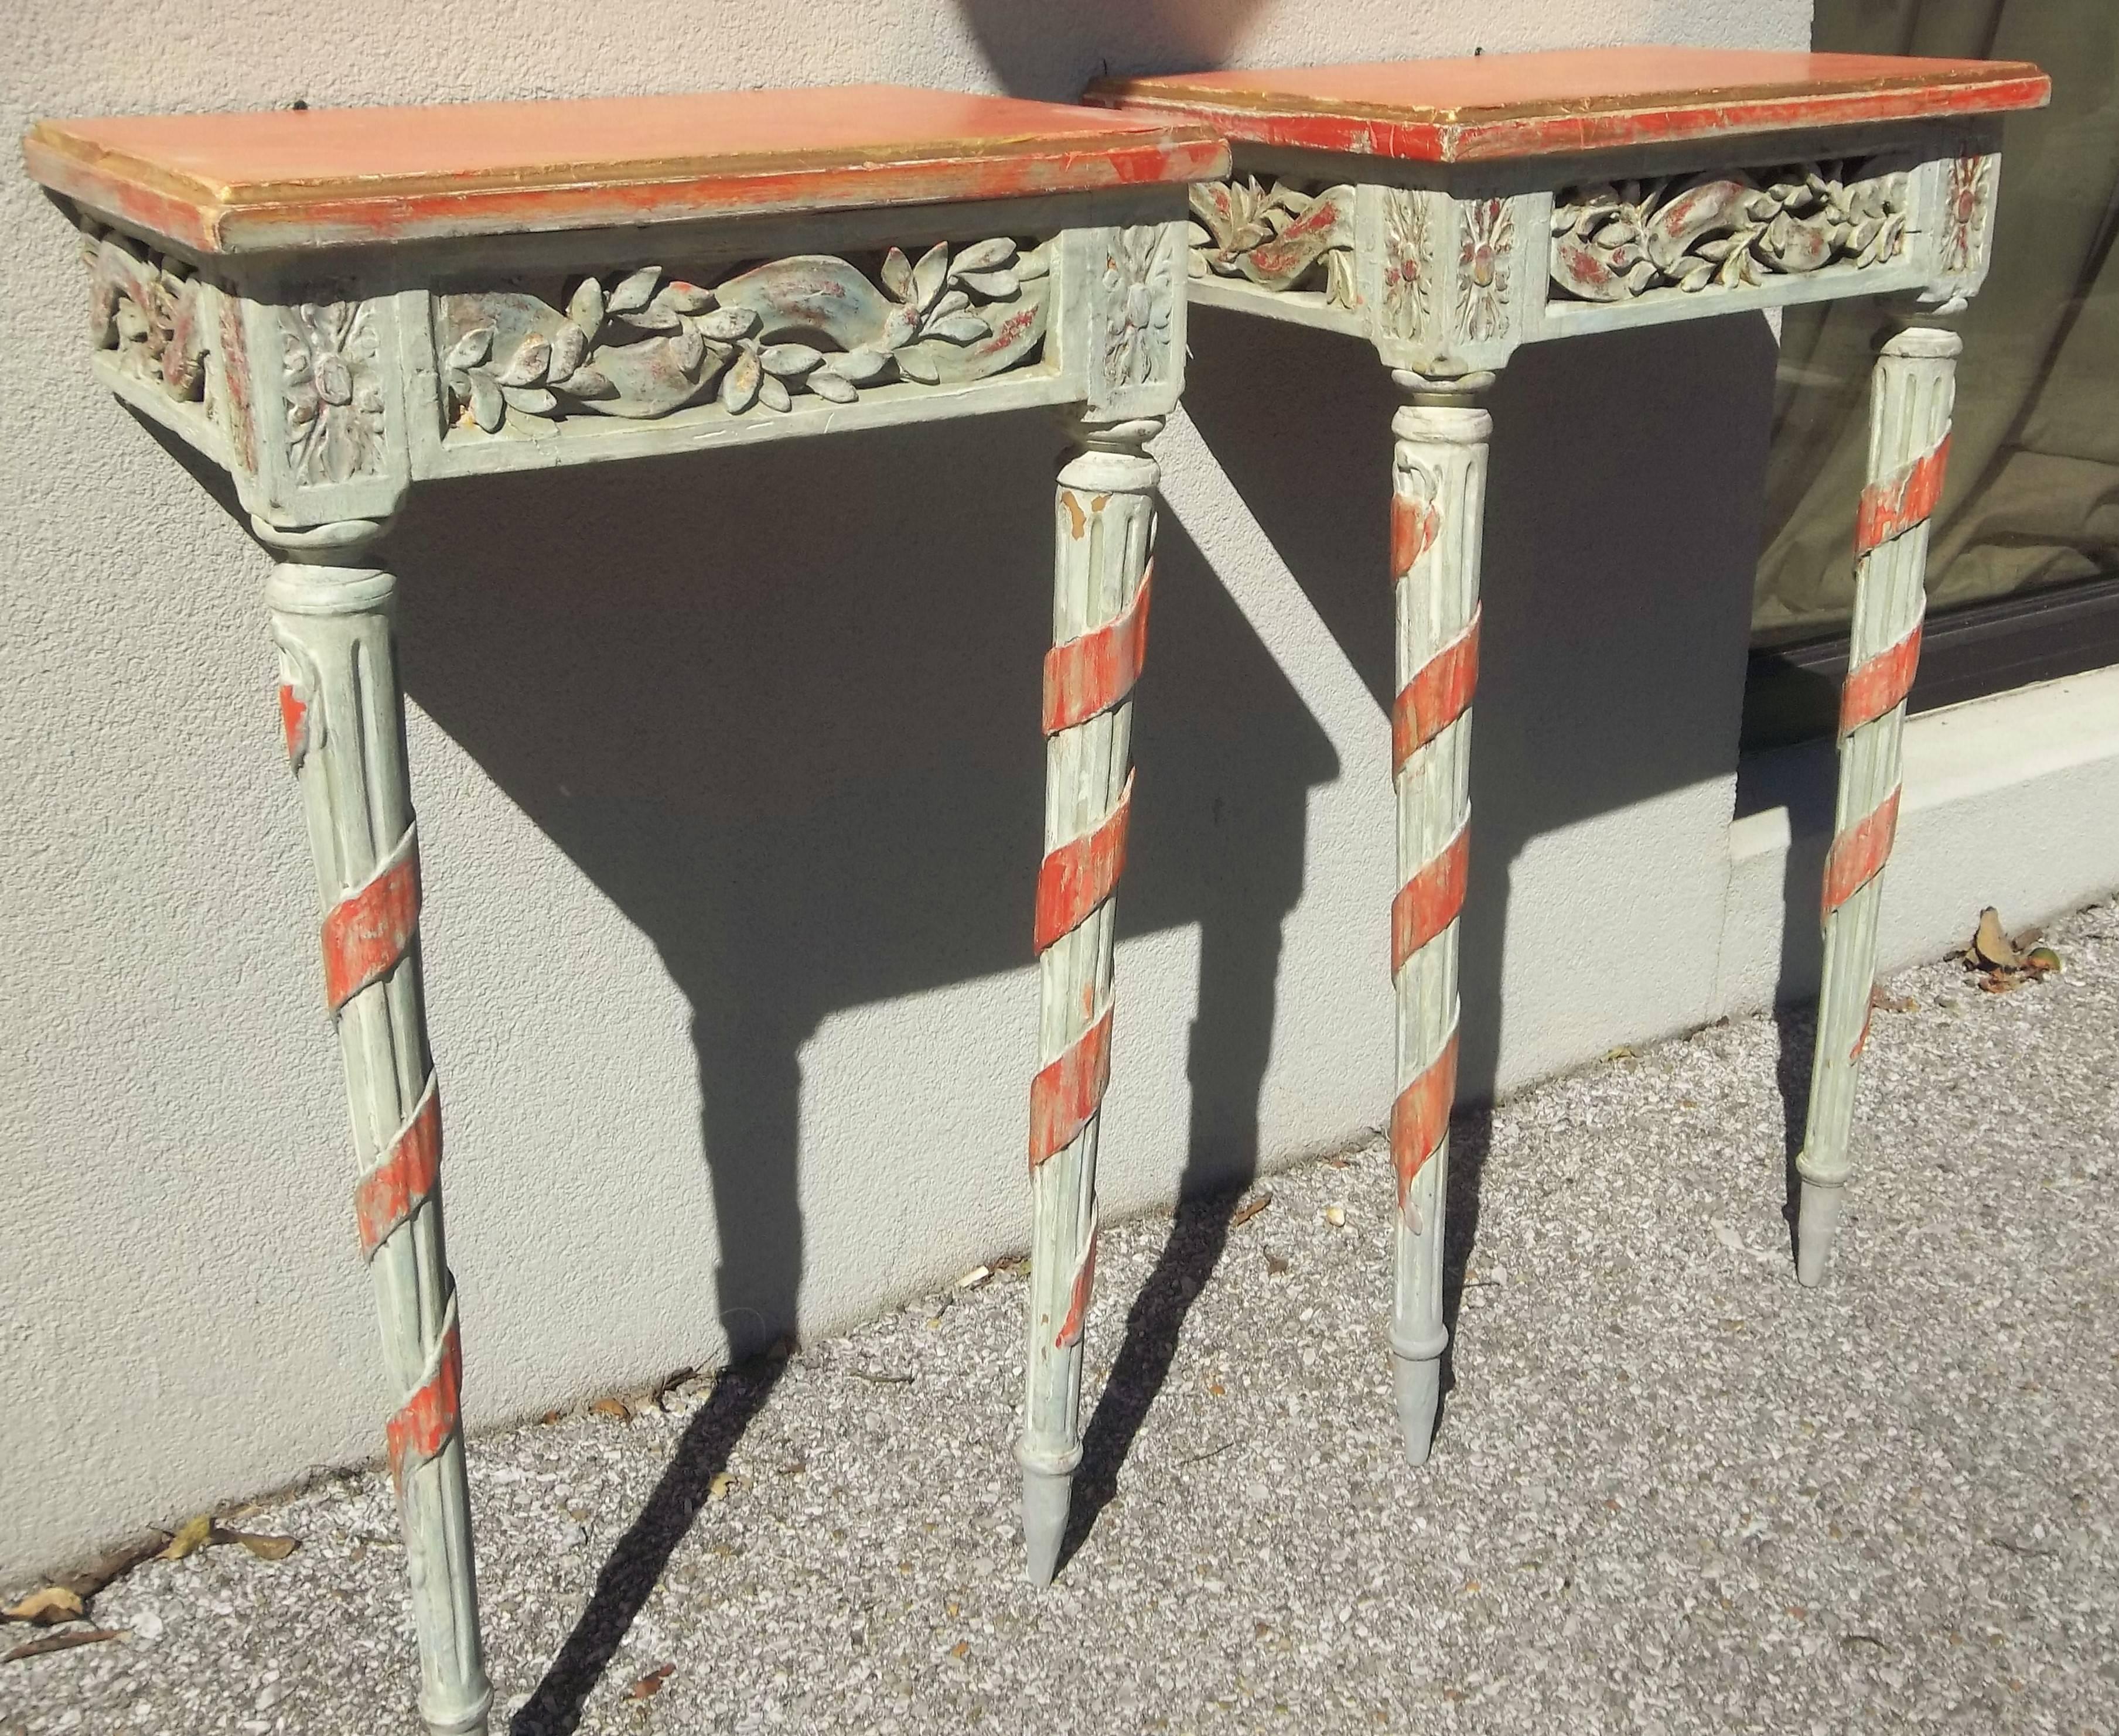 All carved wood and probably originally giltwood with a marble top.Traces of original gilt bleeding through the green - gray paint as well as original red bole . Peg construction and hand saw marks indicate early 19th century circa 1820-1830 and